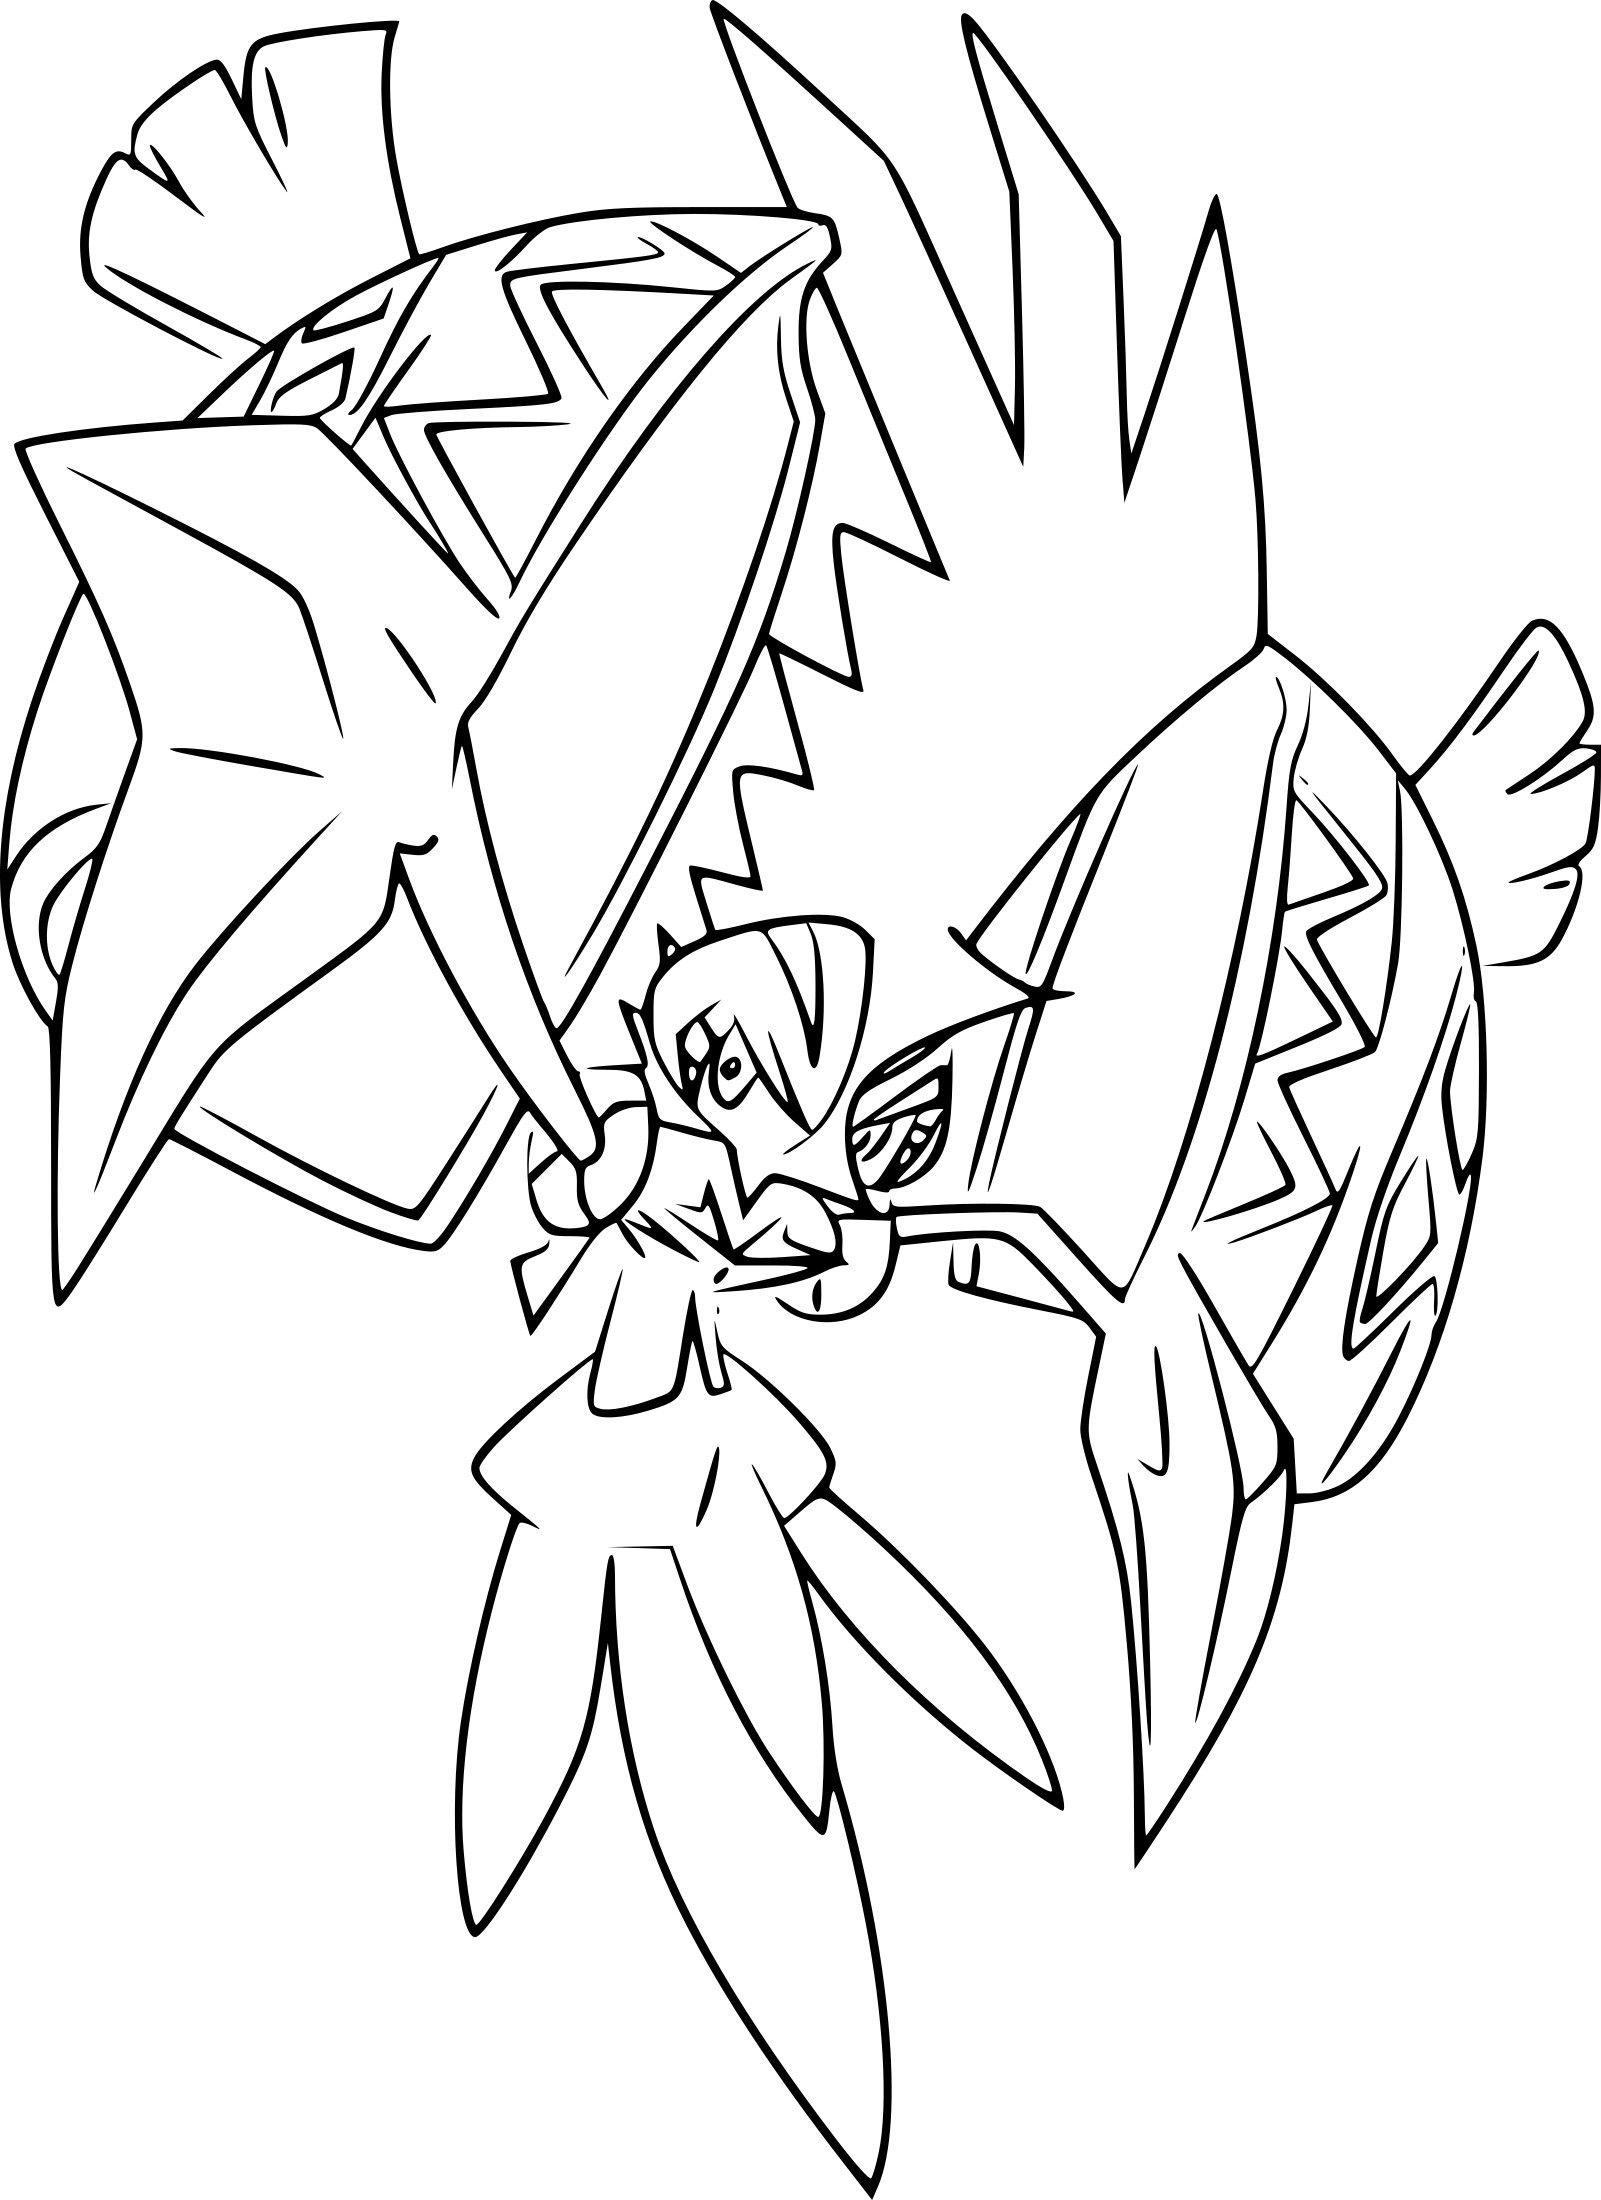 Pokemon Tapu Koko Coloring Pages – Through the thousand pictures on the net  in relation to … | Moon coloring pages, Pokemon coloring pages, Superhero coloring  pages